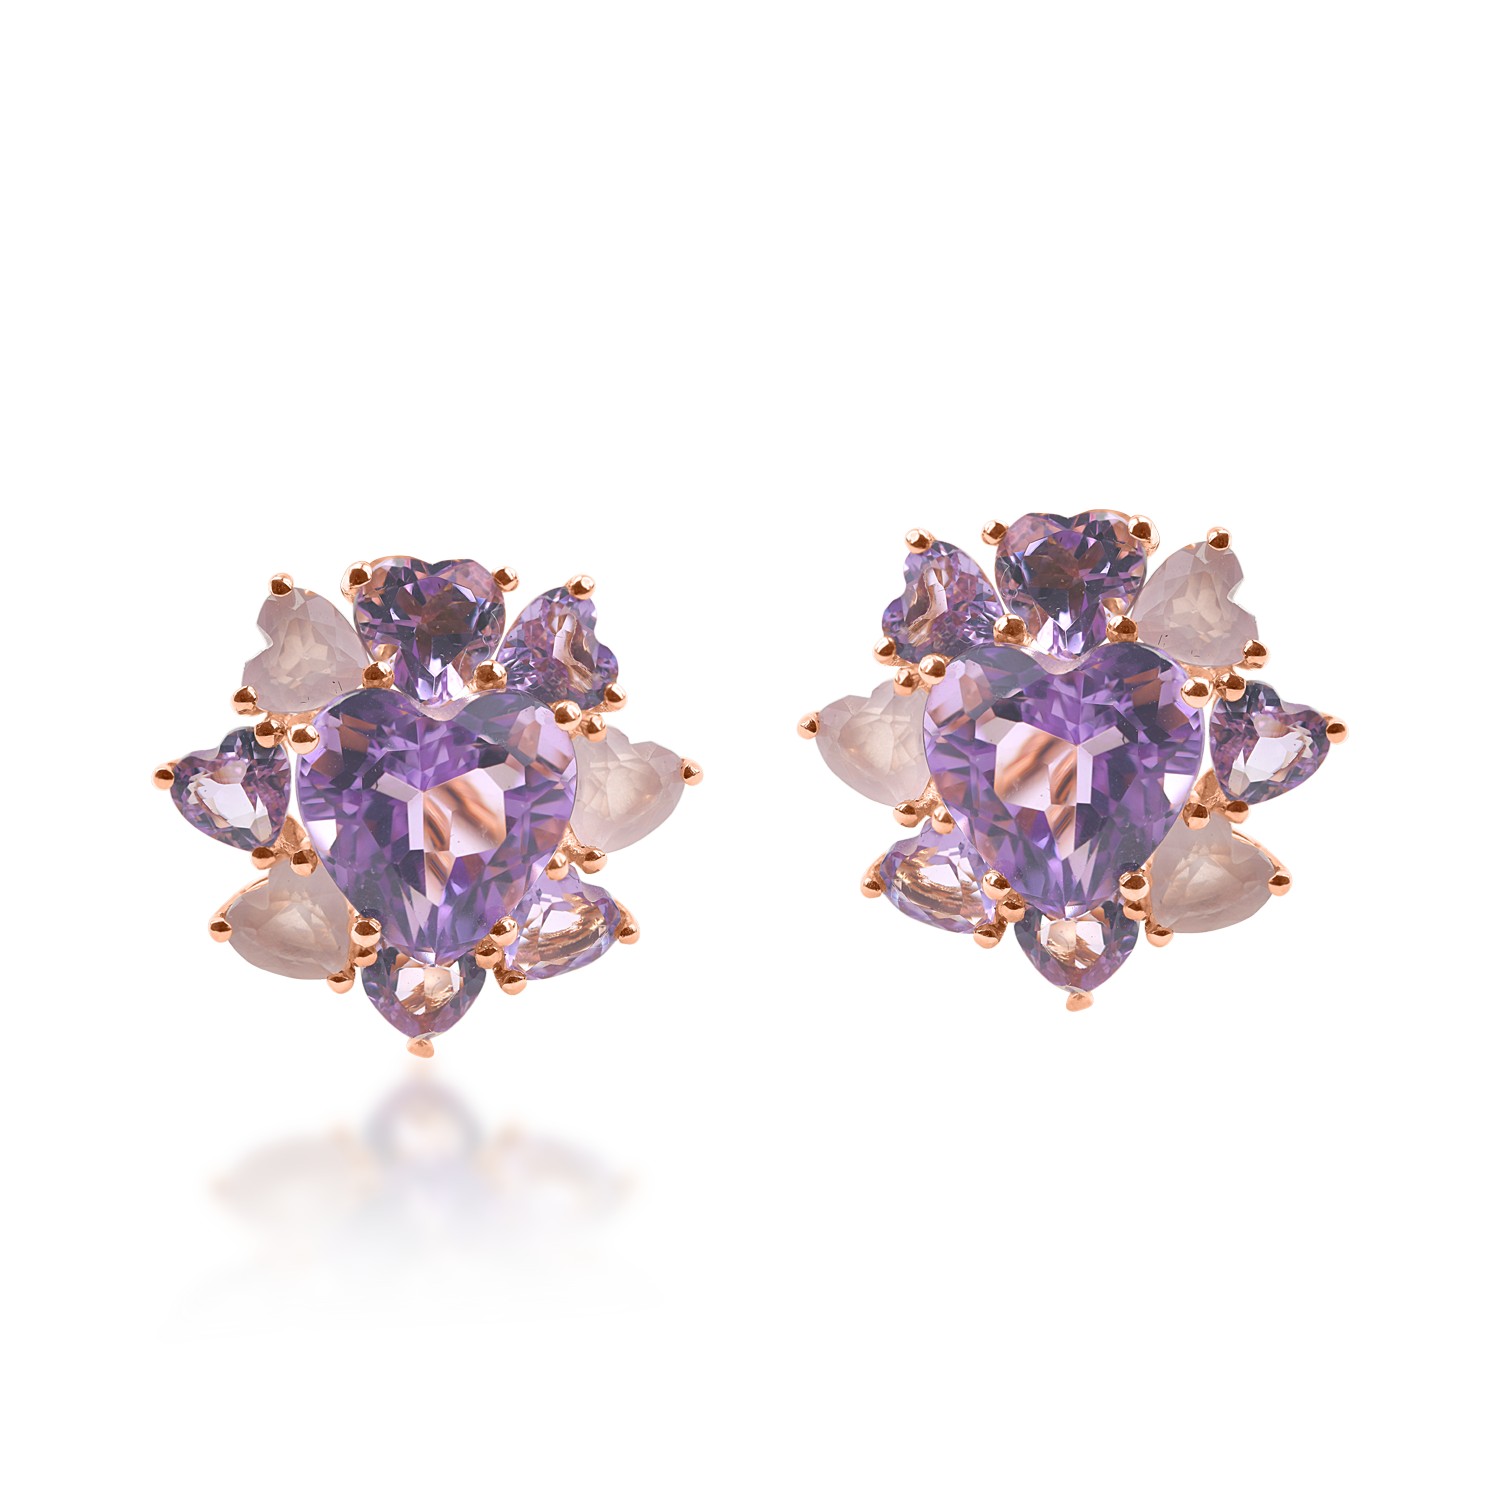 Rose gold earrings with 9.9ct pink amethysts and rose quartz